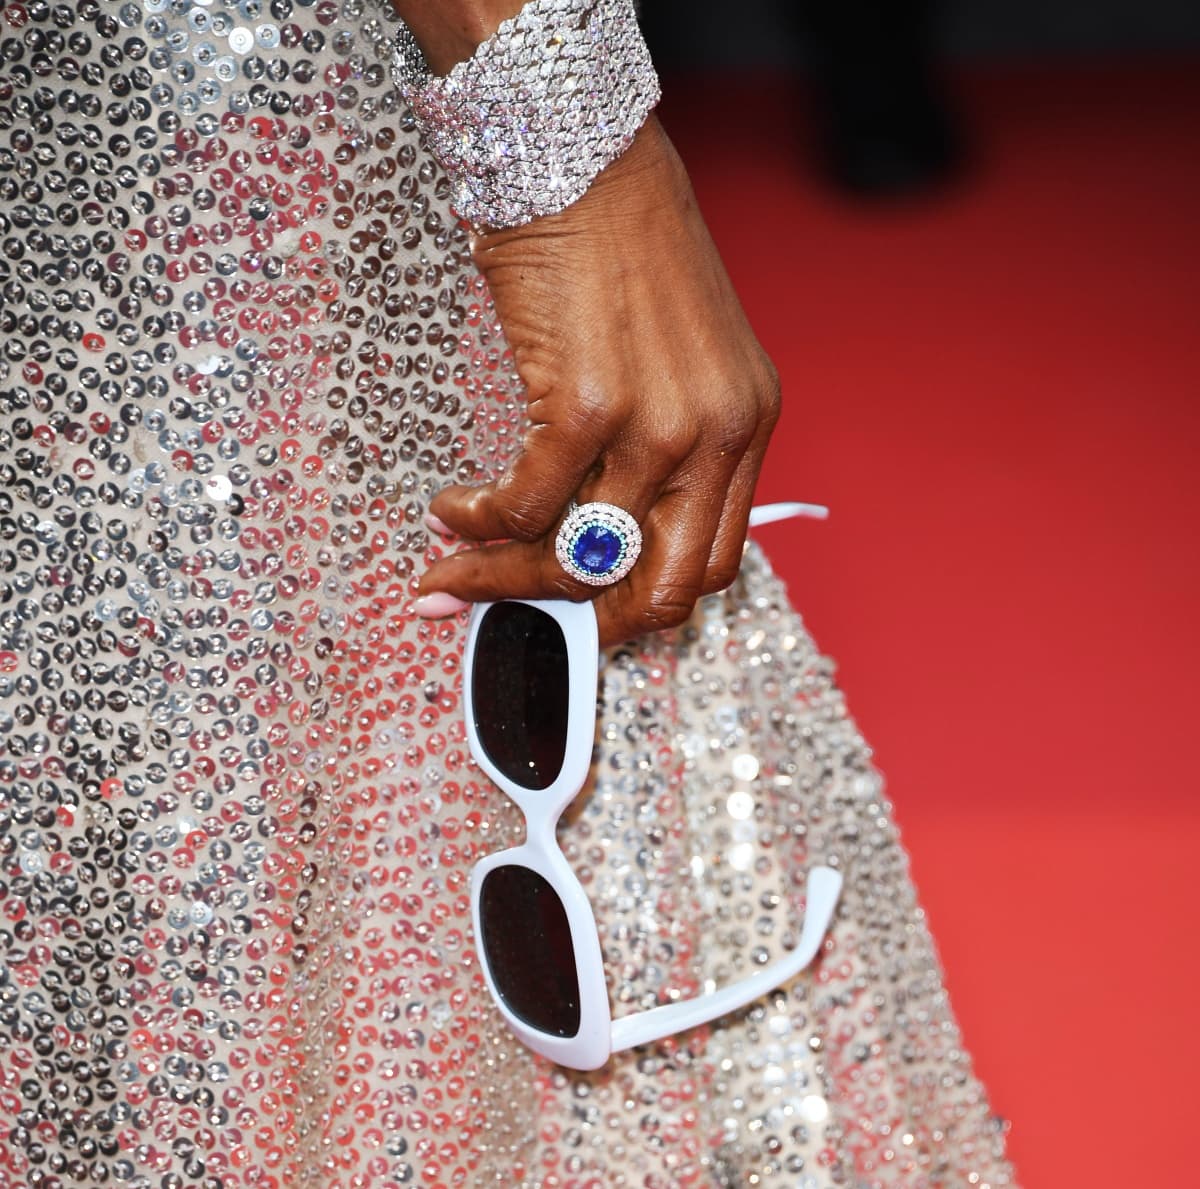 Naomi Campbell’s choice of accessories elevated and added a funky element to her elegant look